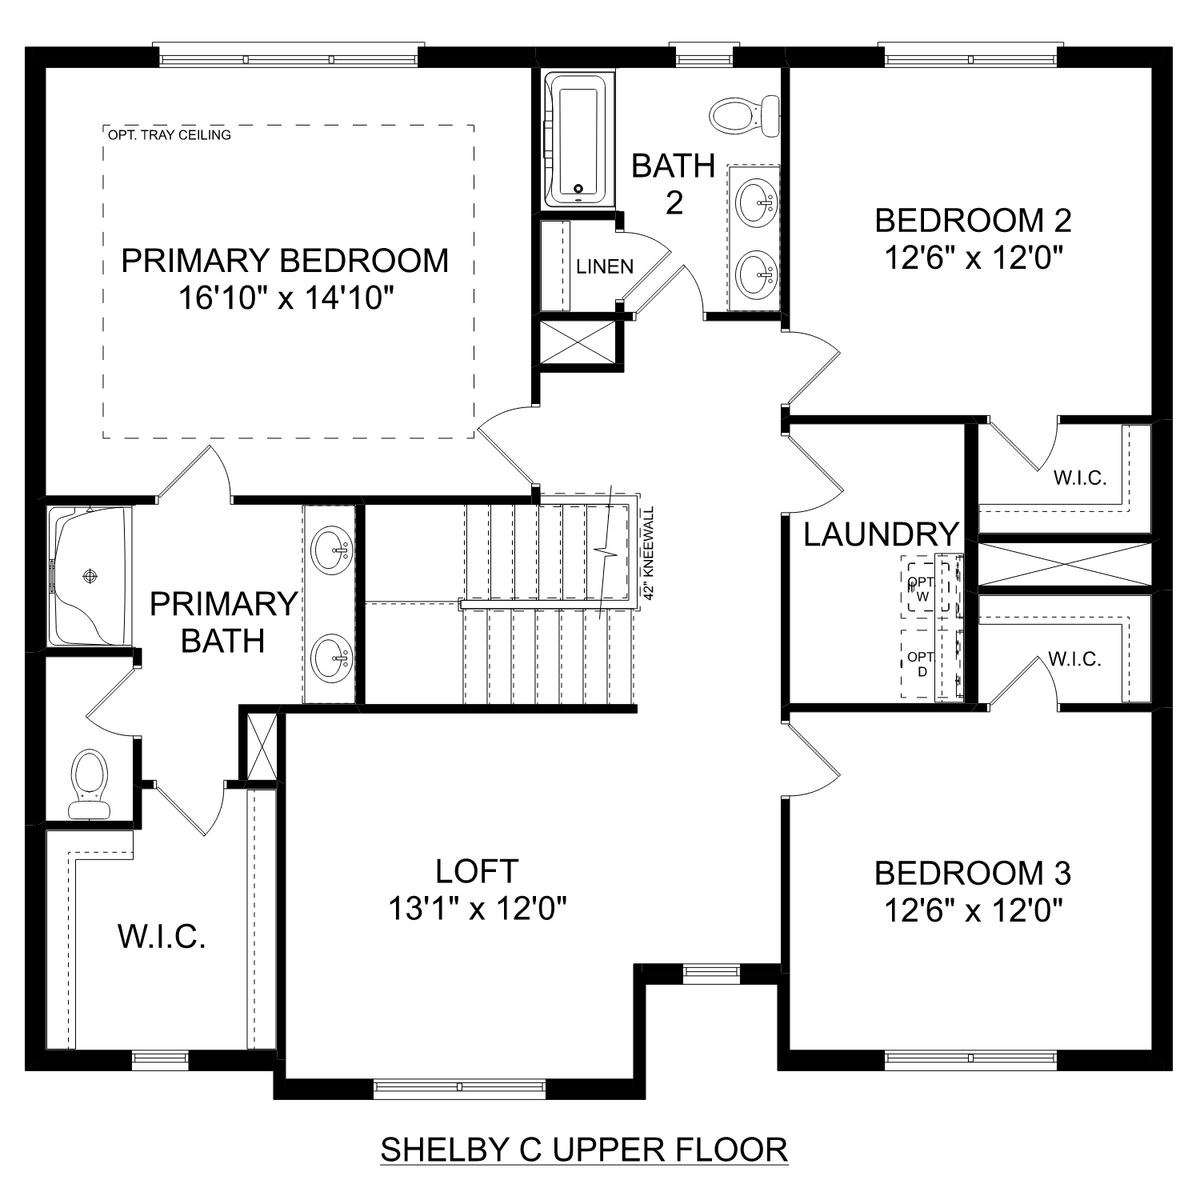 2 - The Shelby C floor plan layout for 134 Amelia Drive in Davidson Homes' Little Burwell Estates community.